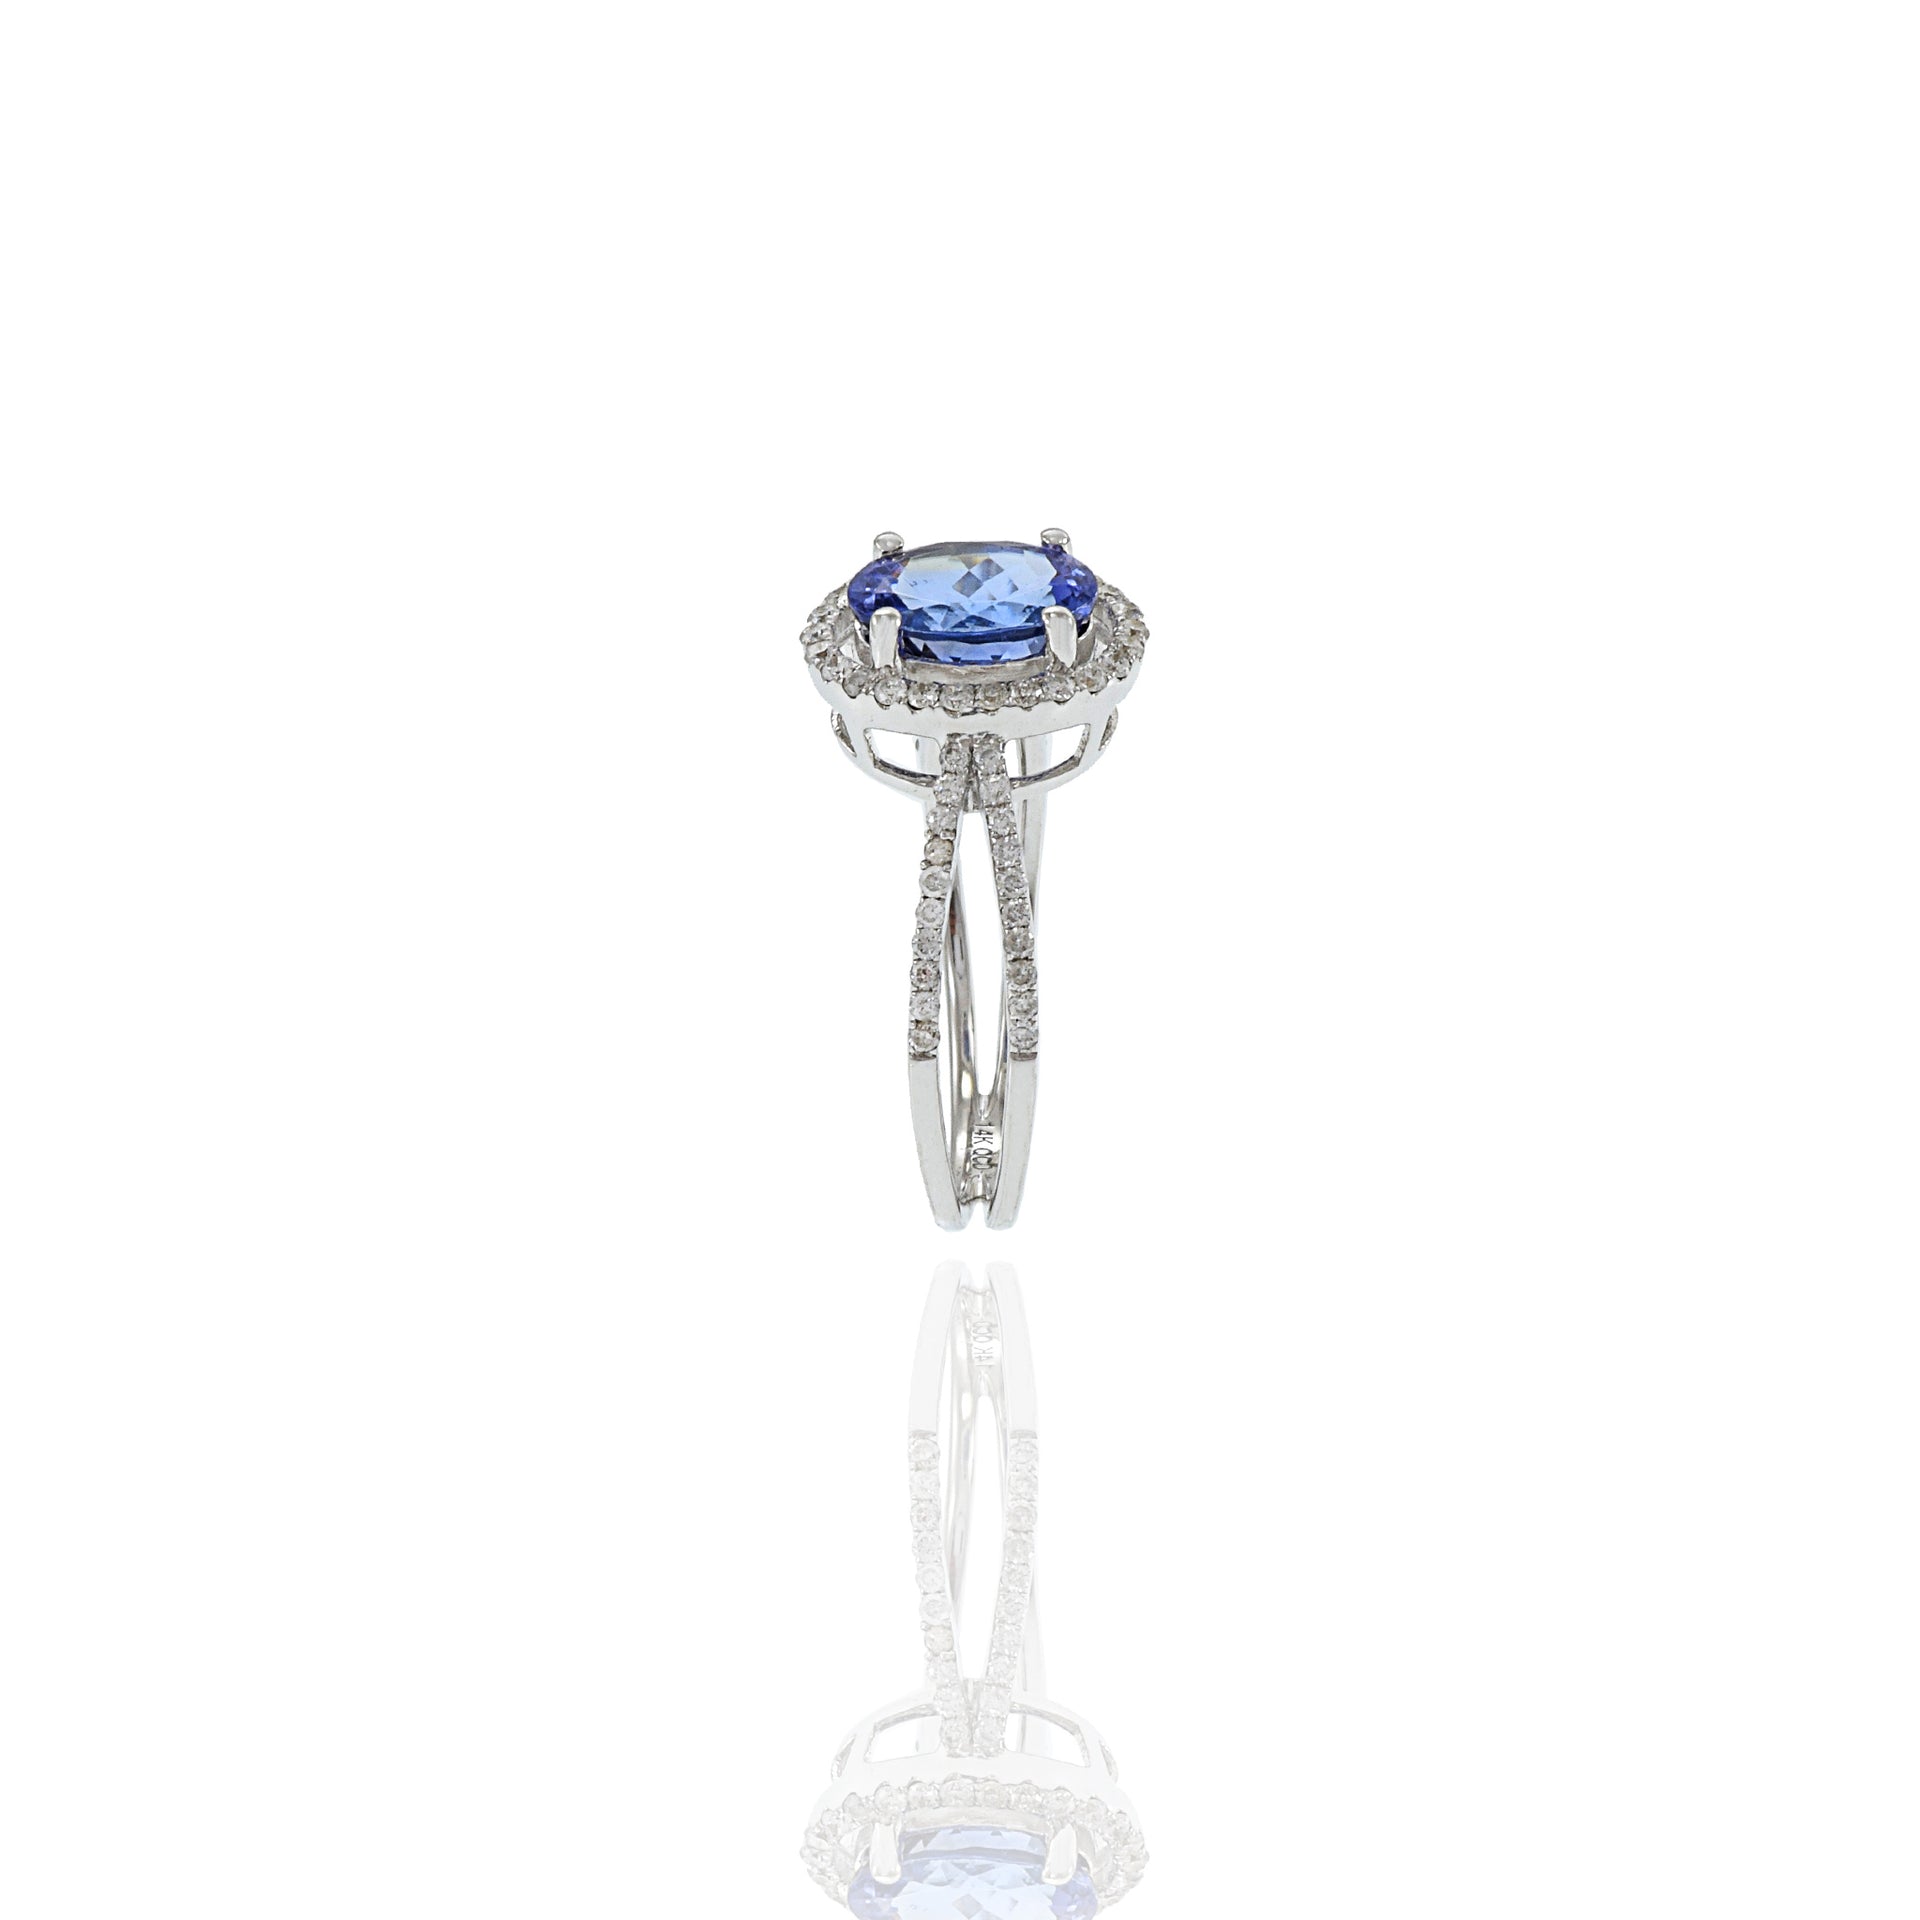 14KT White Gold Oval Cut Tanzanite And Diamond Ring